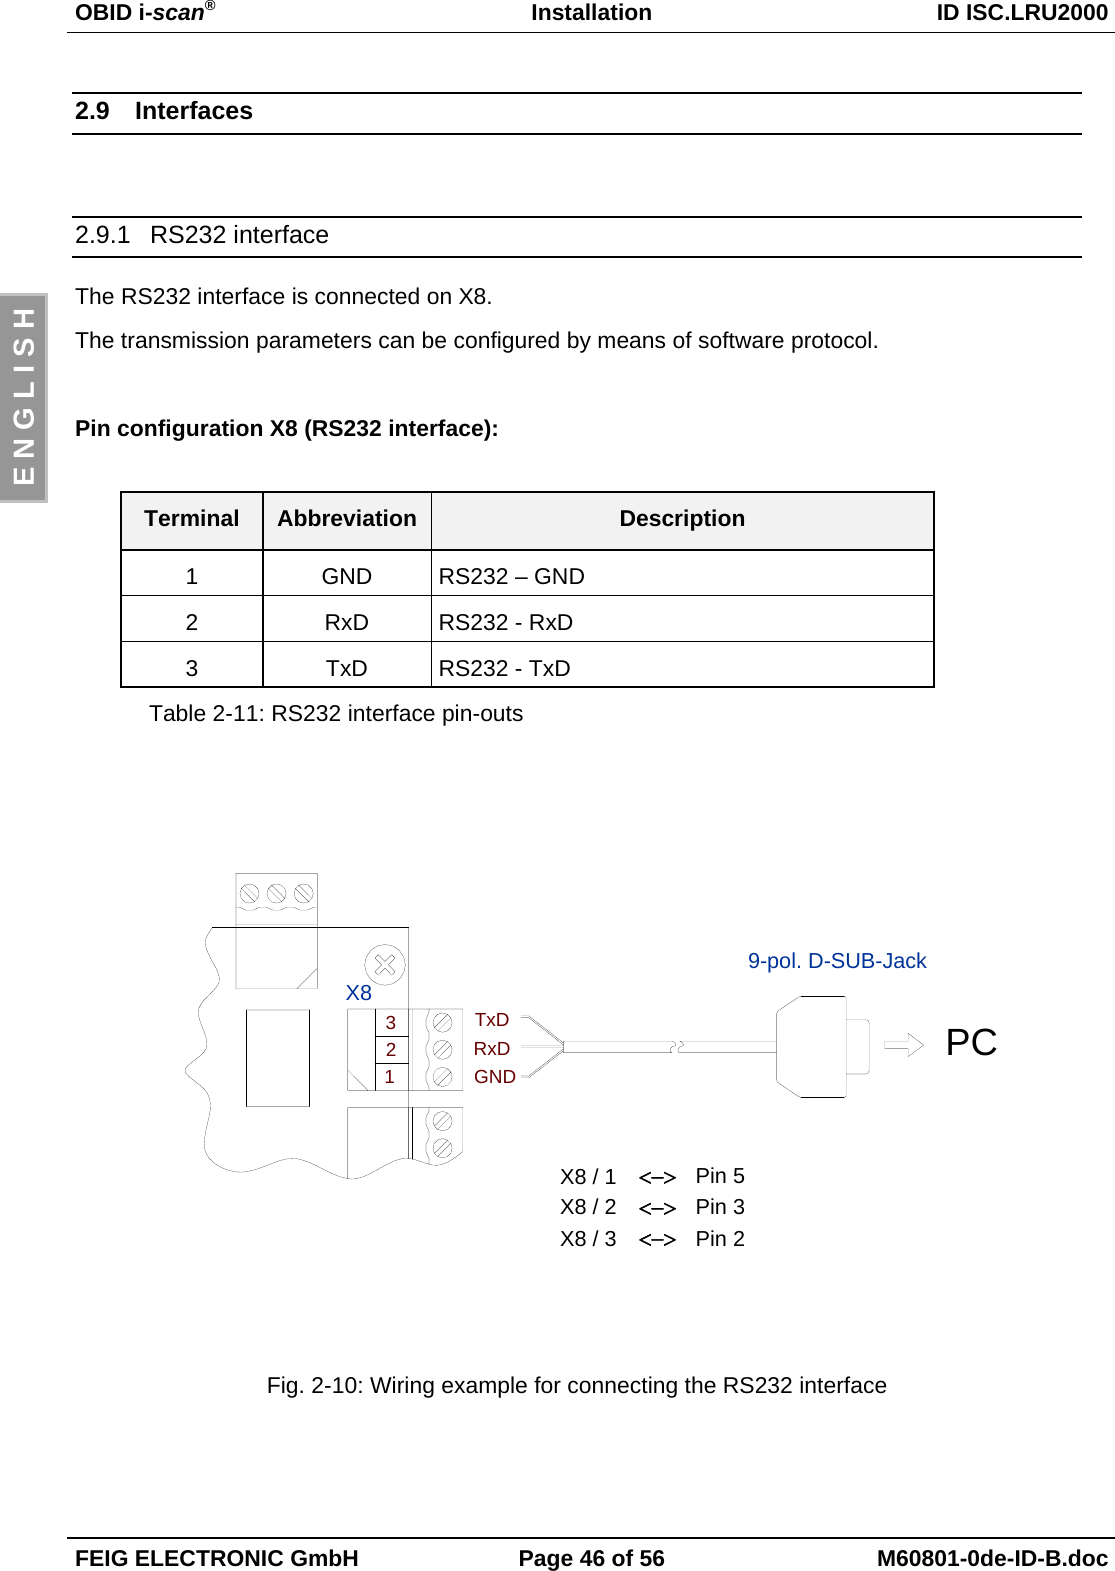 OBID i-scan®Installation ID ISC.LRU2000FEIG ELECTRONIC GmbH Page 46 of 56 M60801-0de-ID-B.docE N G L I S H2.9 Interfaces2.9.1 RS232 interfaceThe RS232 interface is connected on X8.The transmission parameters can be configured by means of software protocol.Pin configuration X8 (RS232 interface):Terminal Abbreviation Description1 GND RS232 – GND2 RxD RS232 - RxD3 TxD RS232 - TxDTable 2-11: RS232 interface pin-outsX8 / 3X8 / 2X8 / 1Pin 2&lt;−&gt;Pin 5Pin 3&lt;−&gt;&lt;−&gt;9-pol. D-SUB-Jack123X8TxDRxDGND PCFig. 2-10: Wiring example for connecting the RS232 interface